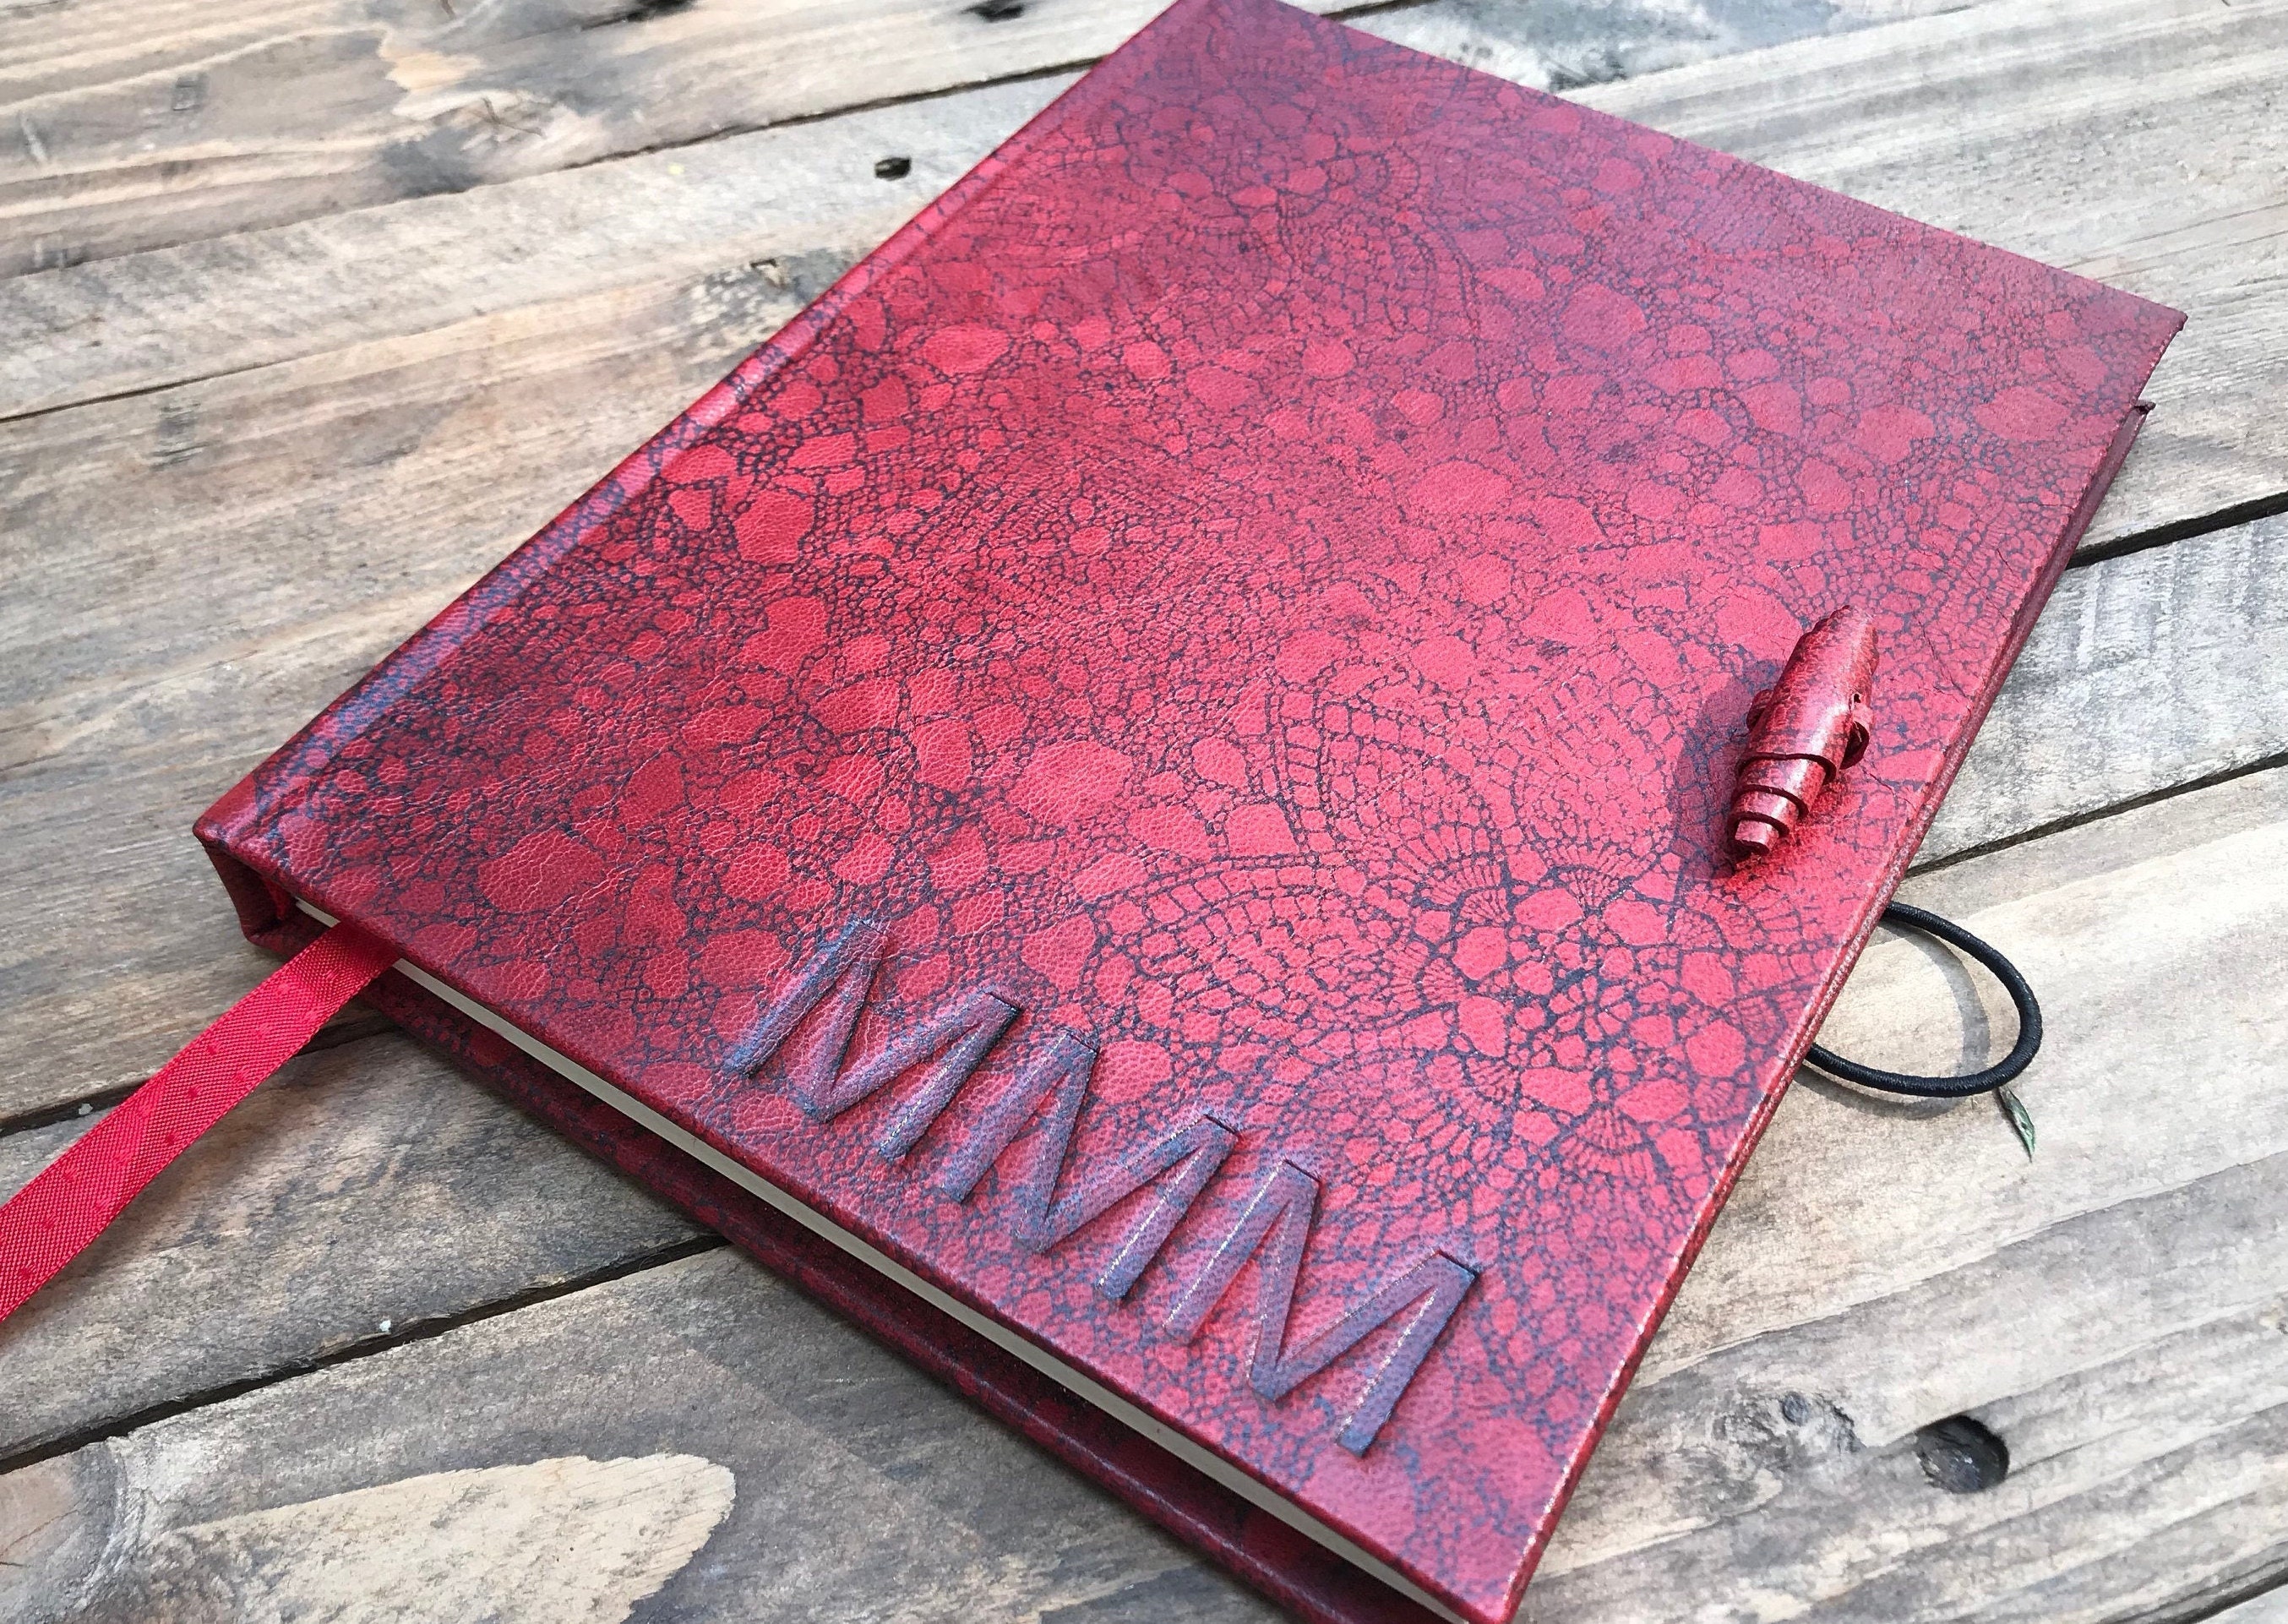 SCRAPBOOK JOURNAL - FULL-LEATHER BOUND 